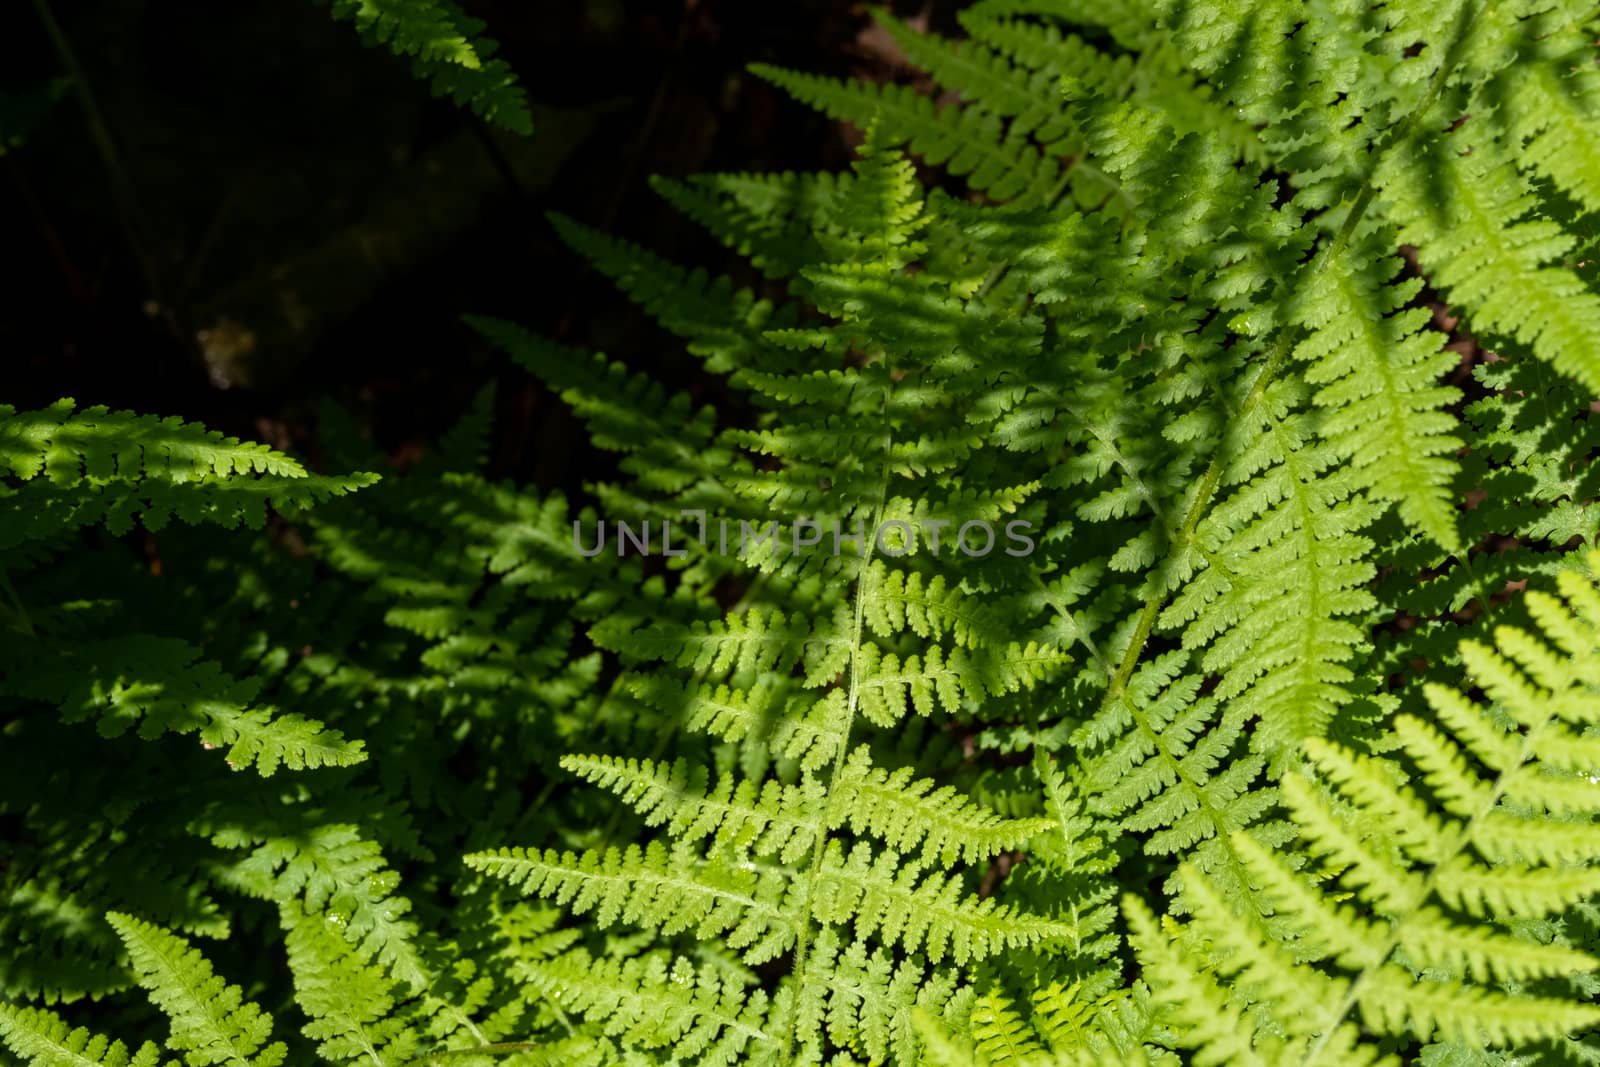 The leaves of green ferns in the forest are seen from above, with shadows of other fern leaves cast upon them.